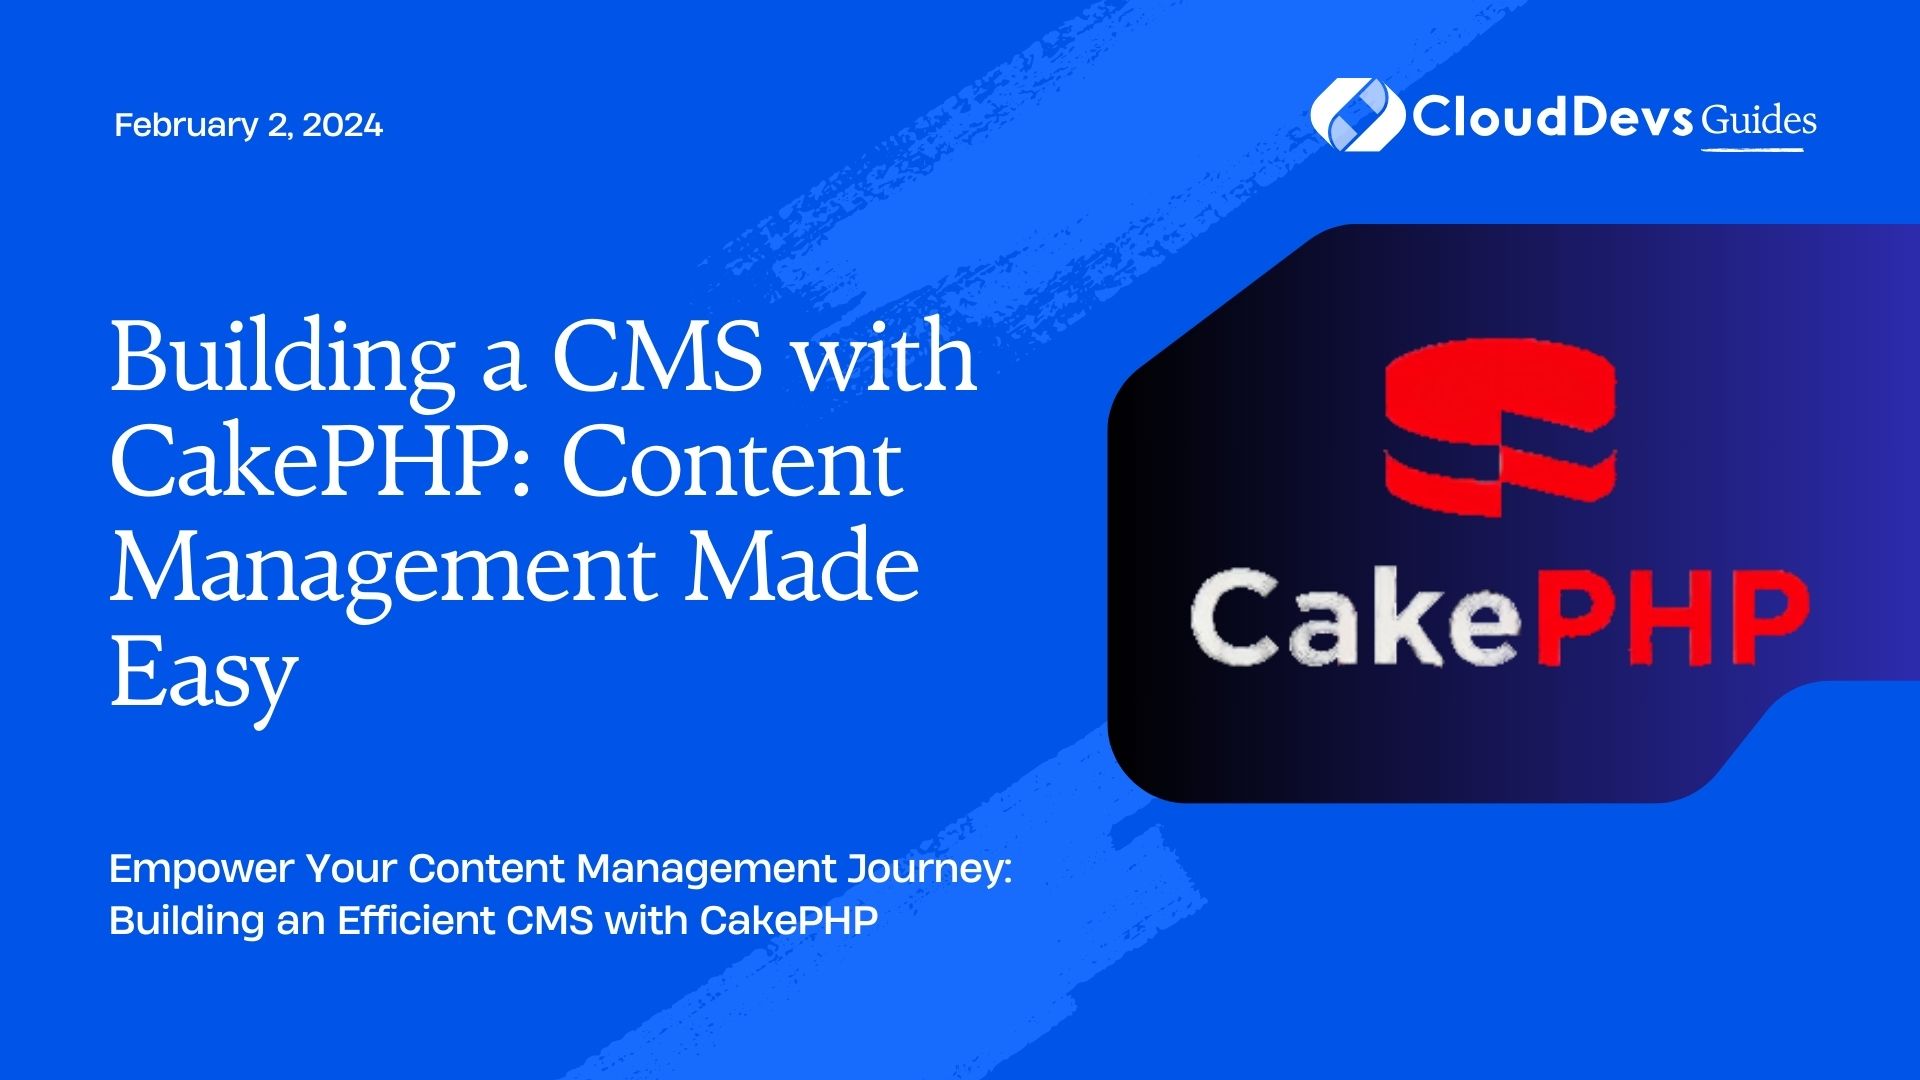 Building a CMS with CakePHP: Content Management Made Easy